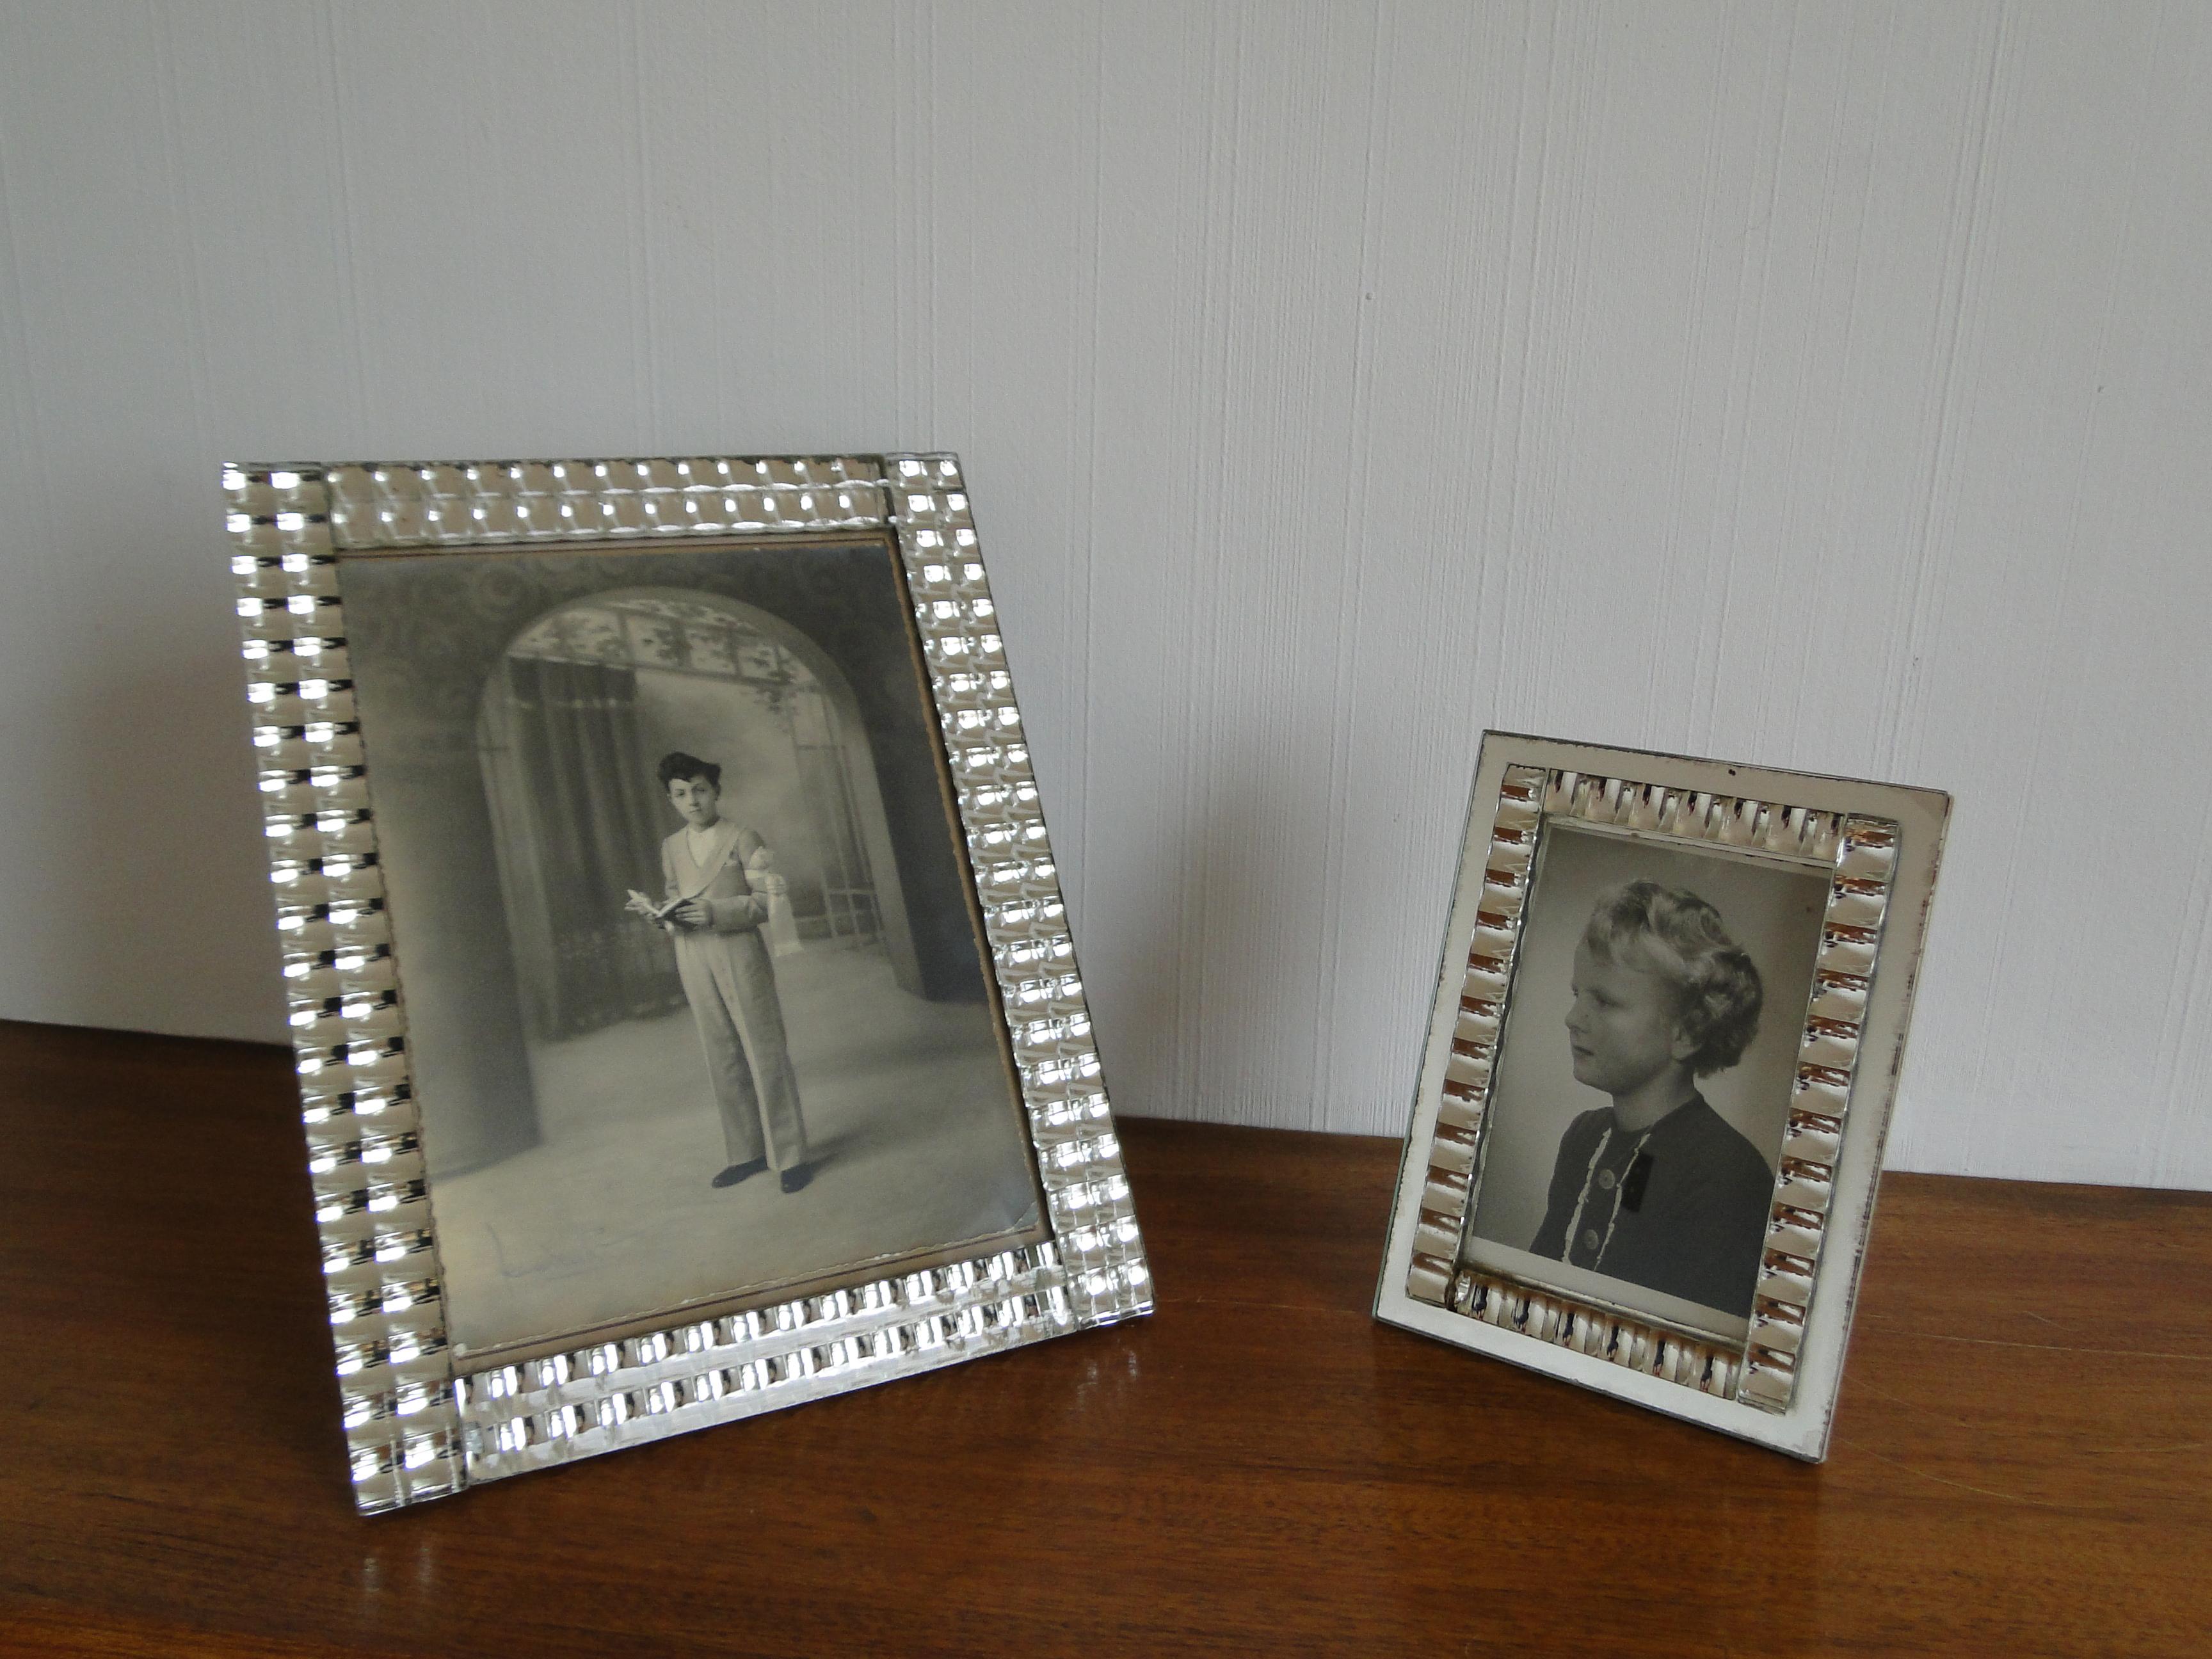 2 Mid-Century Modern style mirror photo frames. The sides are beautifully constructed with tiny square domed mirrors with a metallic Kinetic effect. 
The large frame can be placed in portrait or landscape position. Original paper easel and back.